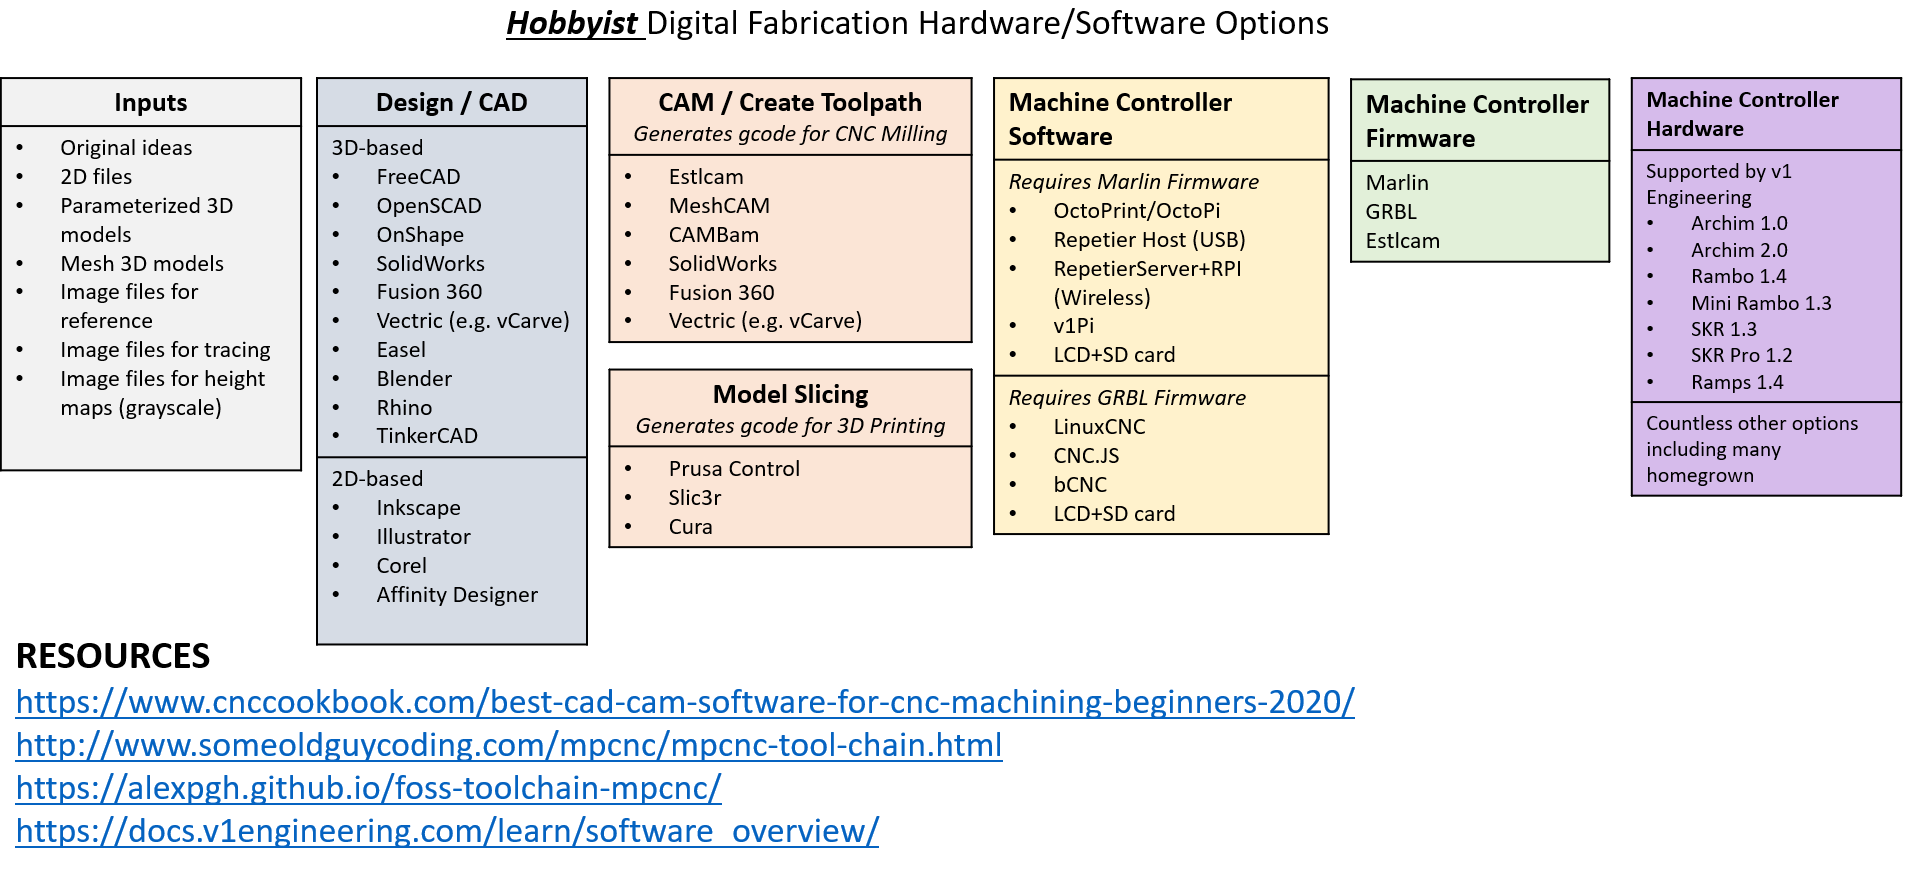 Is this the right way to look at software choices? - General - V1